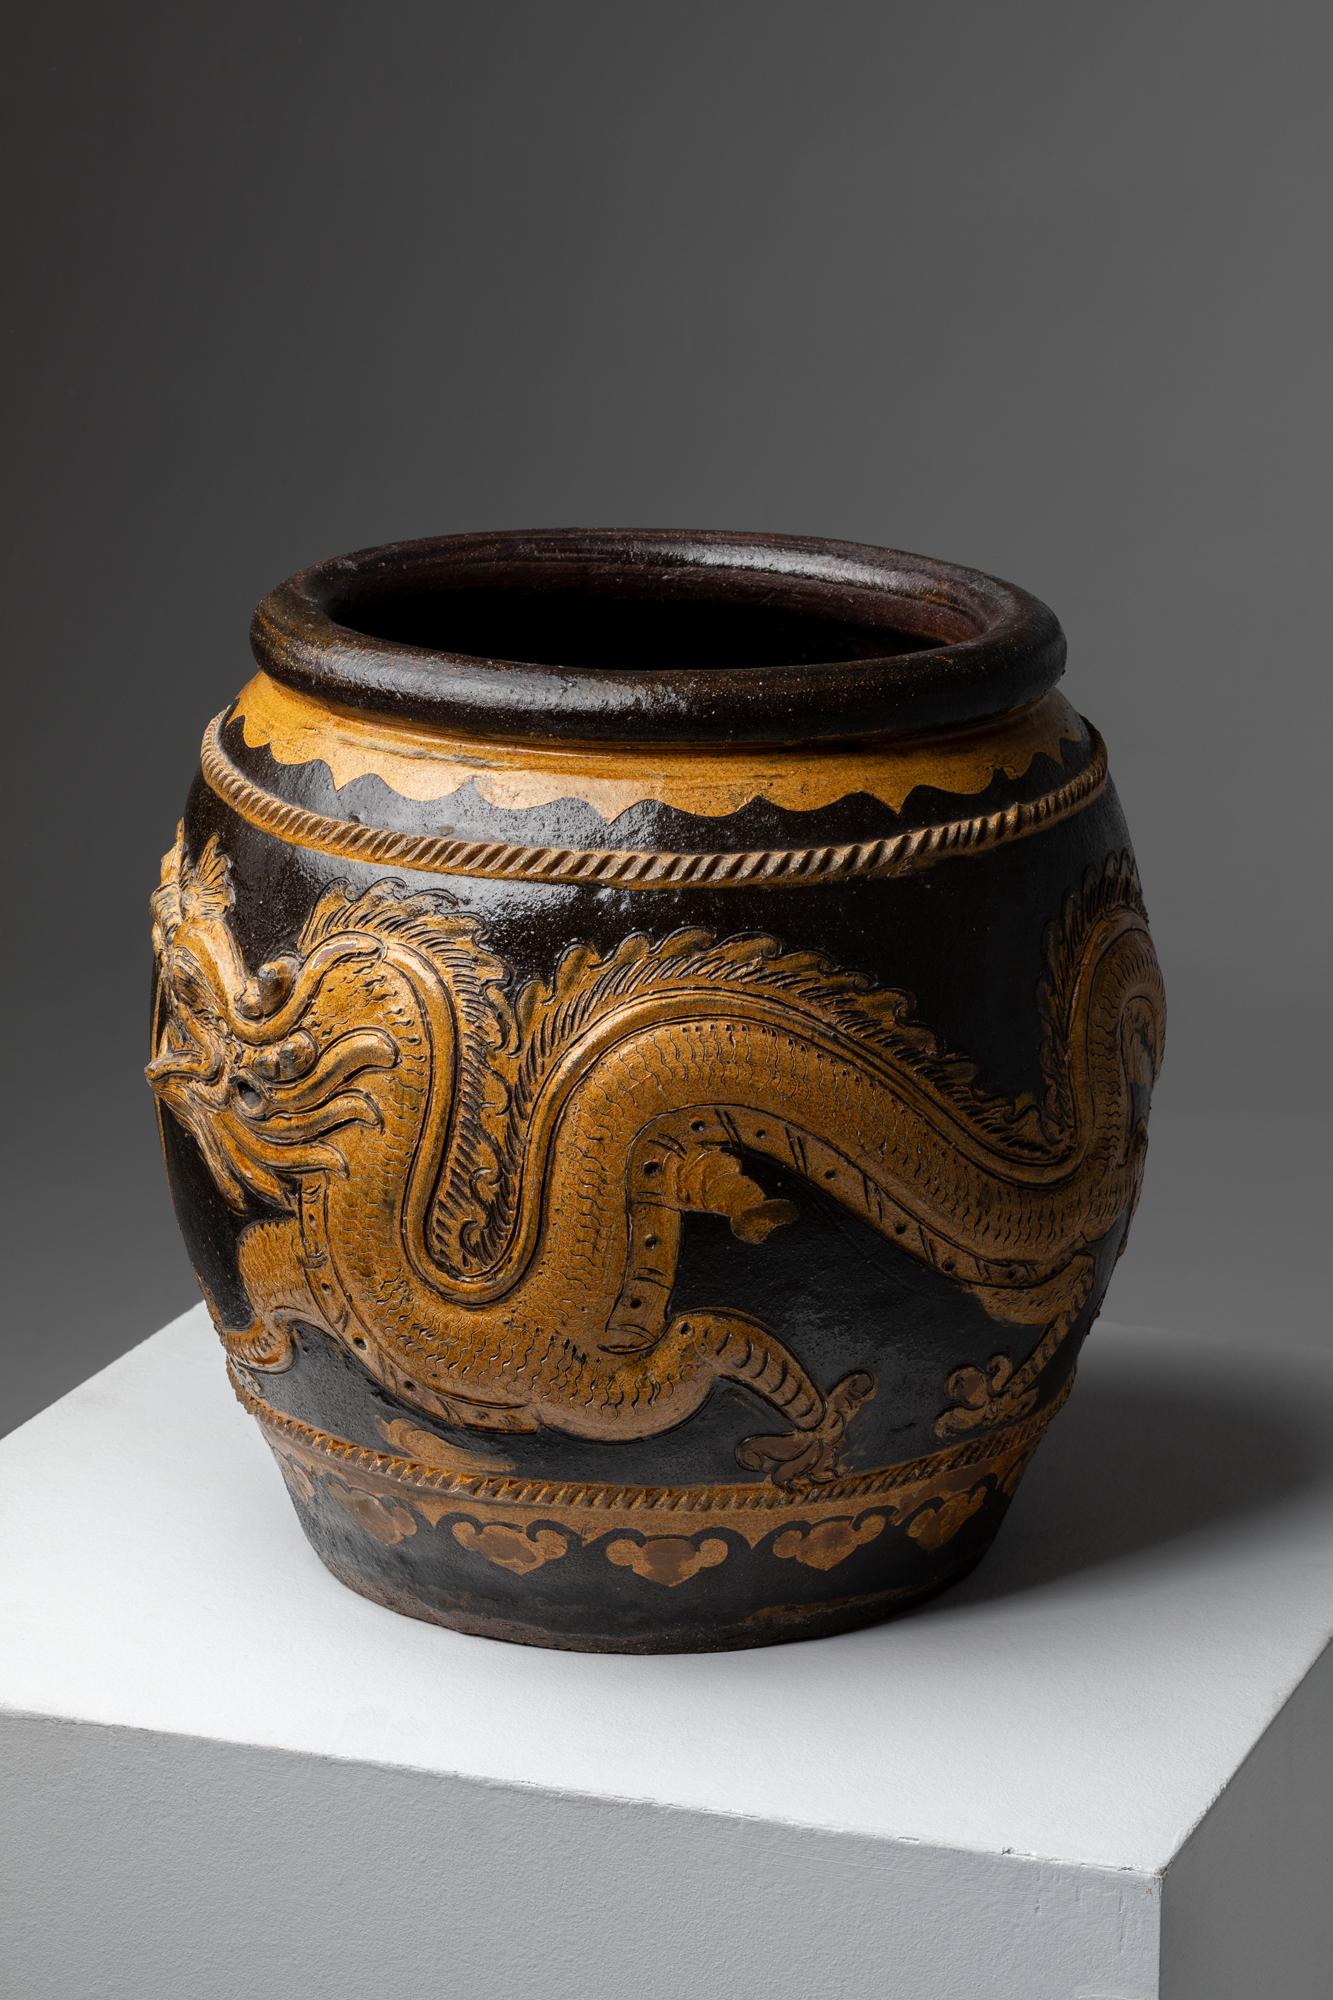 This magnificent large stoneware vase from China dates back to the Qing Dynasty, specifically the 19th century. It showcases exquisite craftsmanship and artistic expression. The vase stands tall, measuring 40x36 cm, and features a remarkable